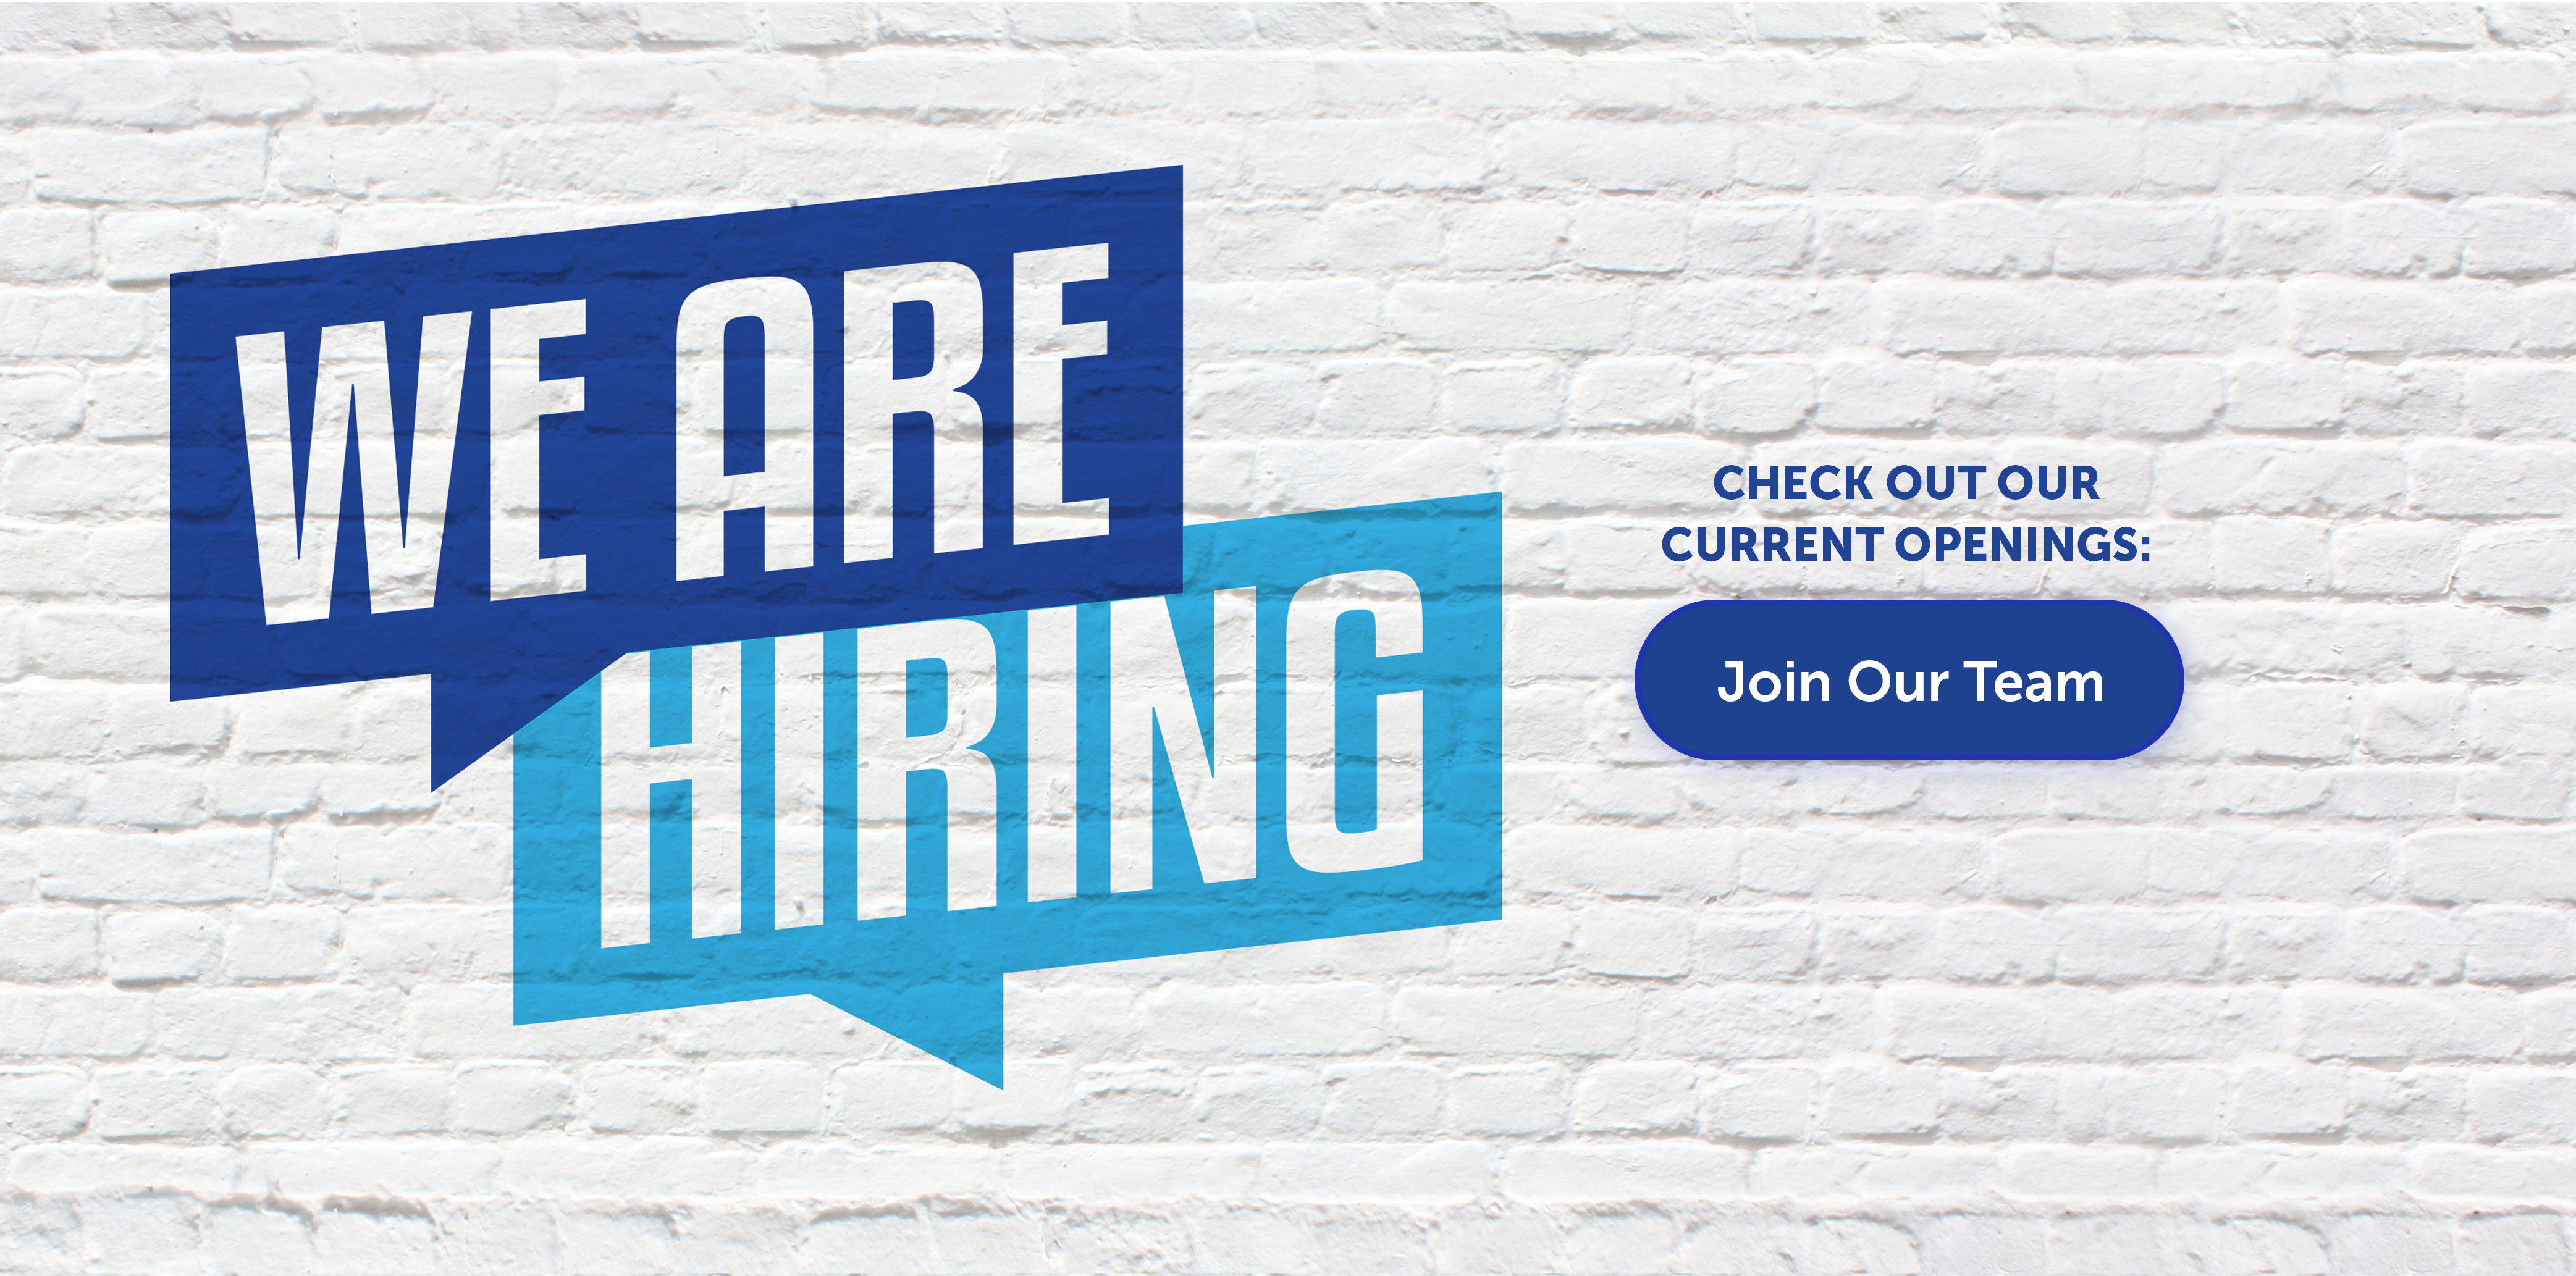 We are hiring. Click here to see our current openings.